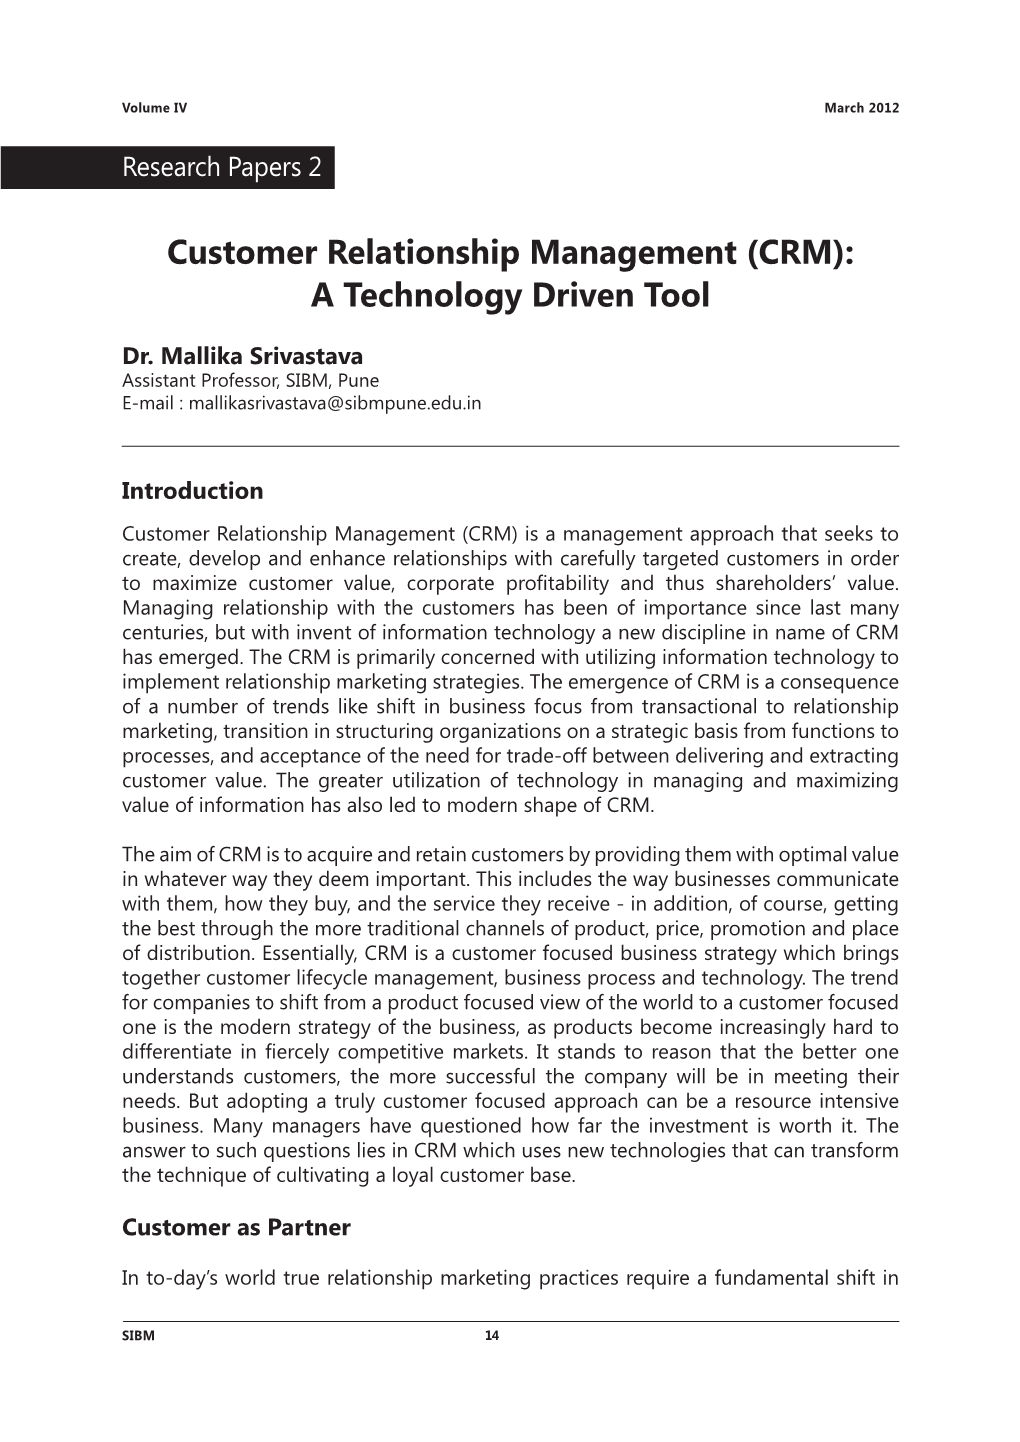 Customer Relationship Management (CRM): a Technology Driven Tool